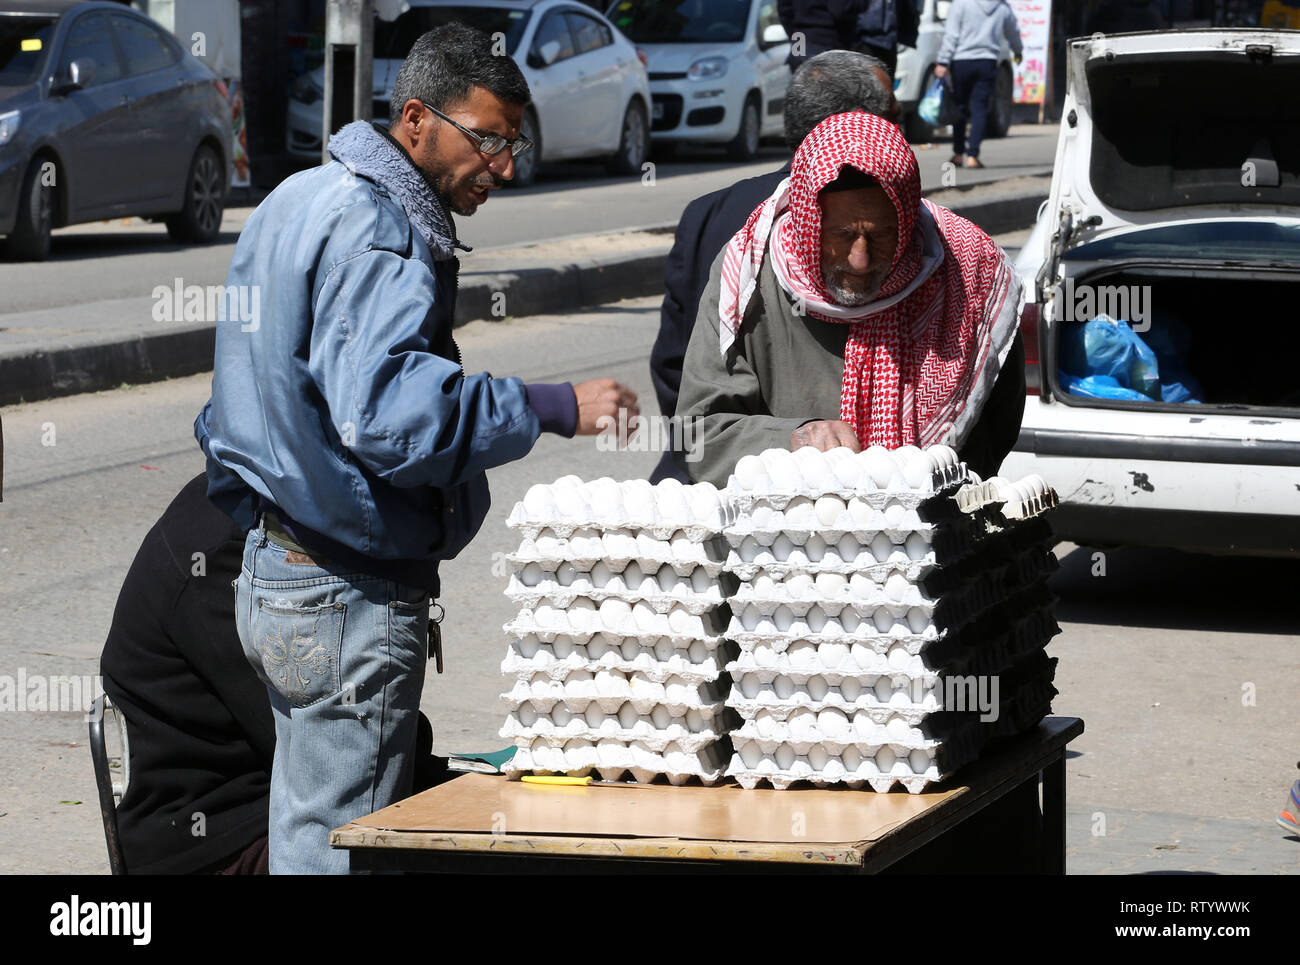 Gaza, Palestine. 03rd Mar, 2019. Civilians go to the local market to buy food and products for their daily needs in Rafah, This is despite the poor economic conditions due to the Israeli siege on the Gaza Strip, on March 3, 2019. Abed Rahim Khatib / awakening / Alamy Live News Credit: Awakening/Alamy Live News Stock Photo